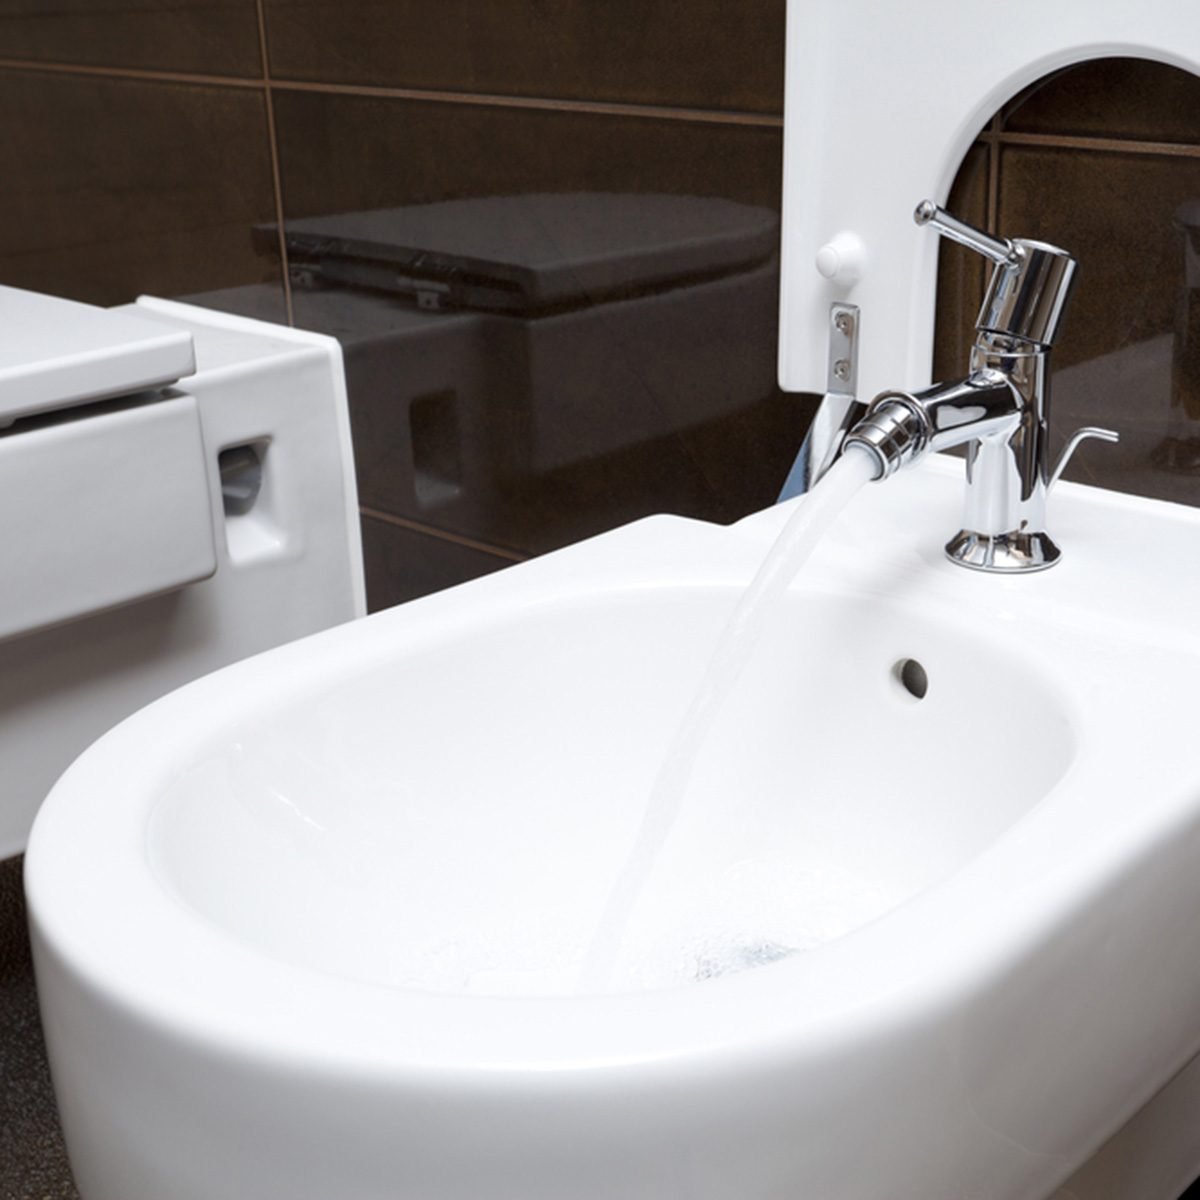 What Is a Bidet and Why Do You Need One?